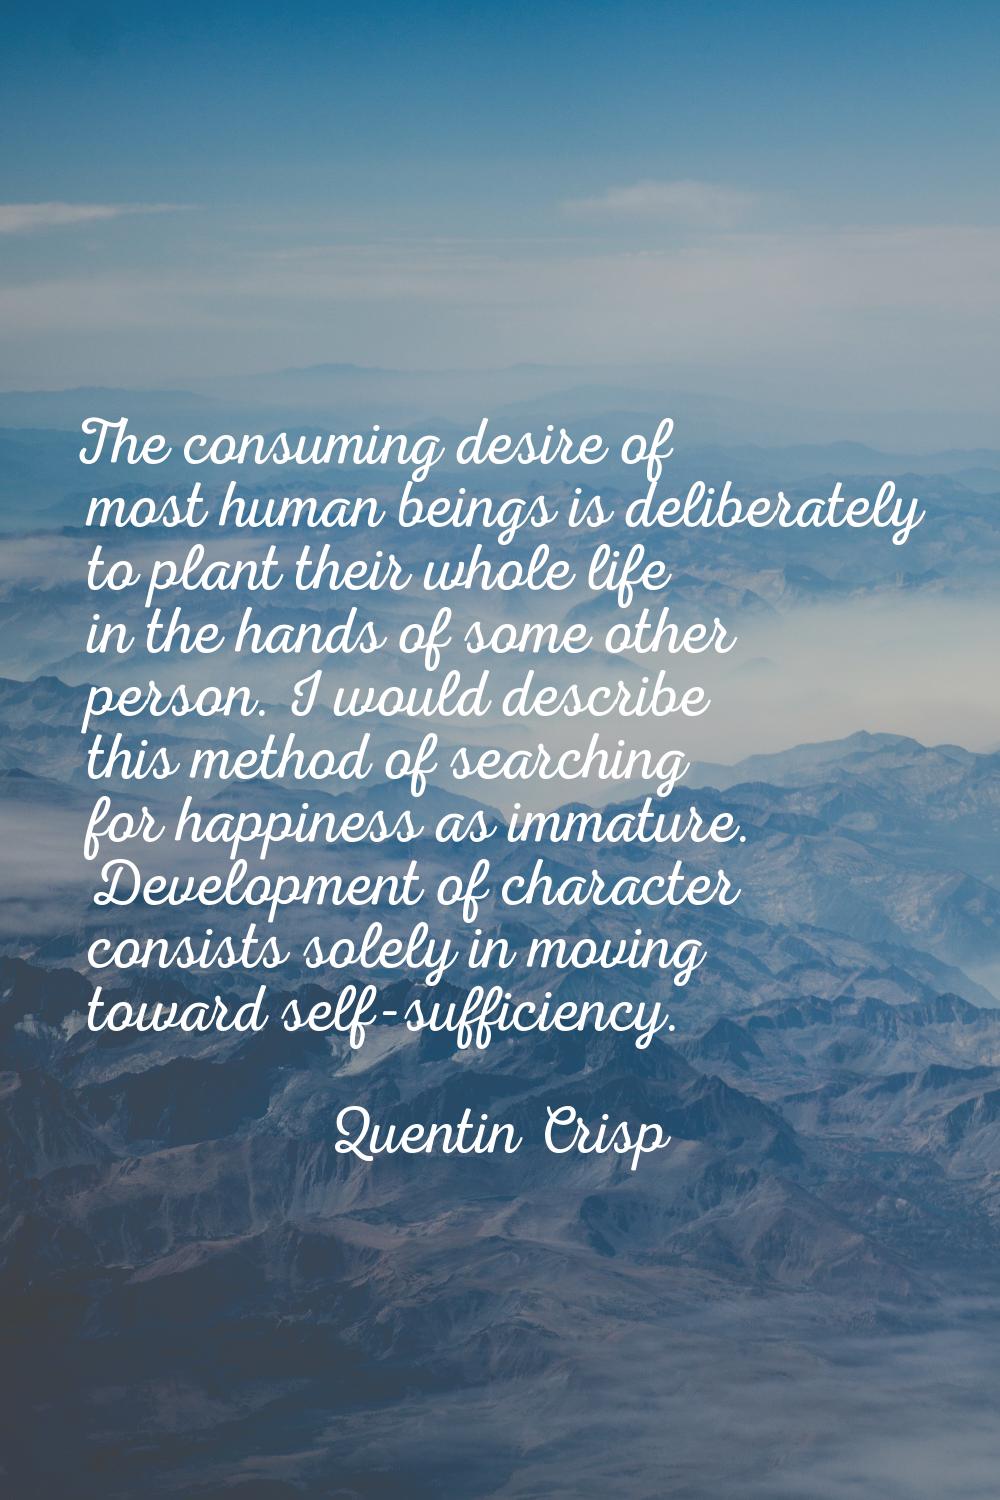 The consuming desire of most human beings is deliberately to plant their whole life in the hands of